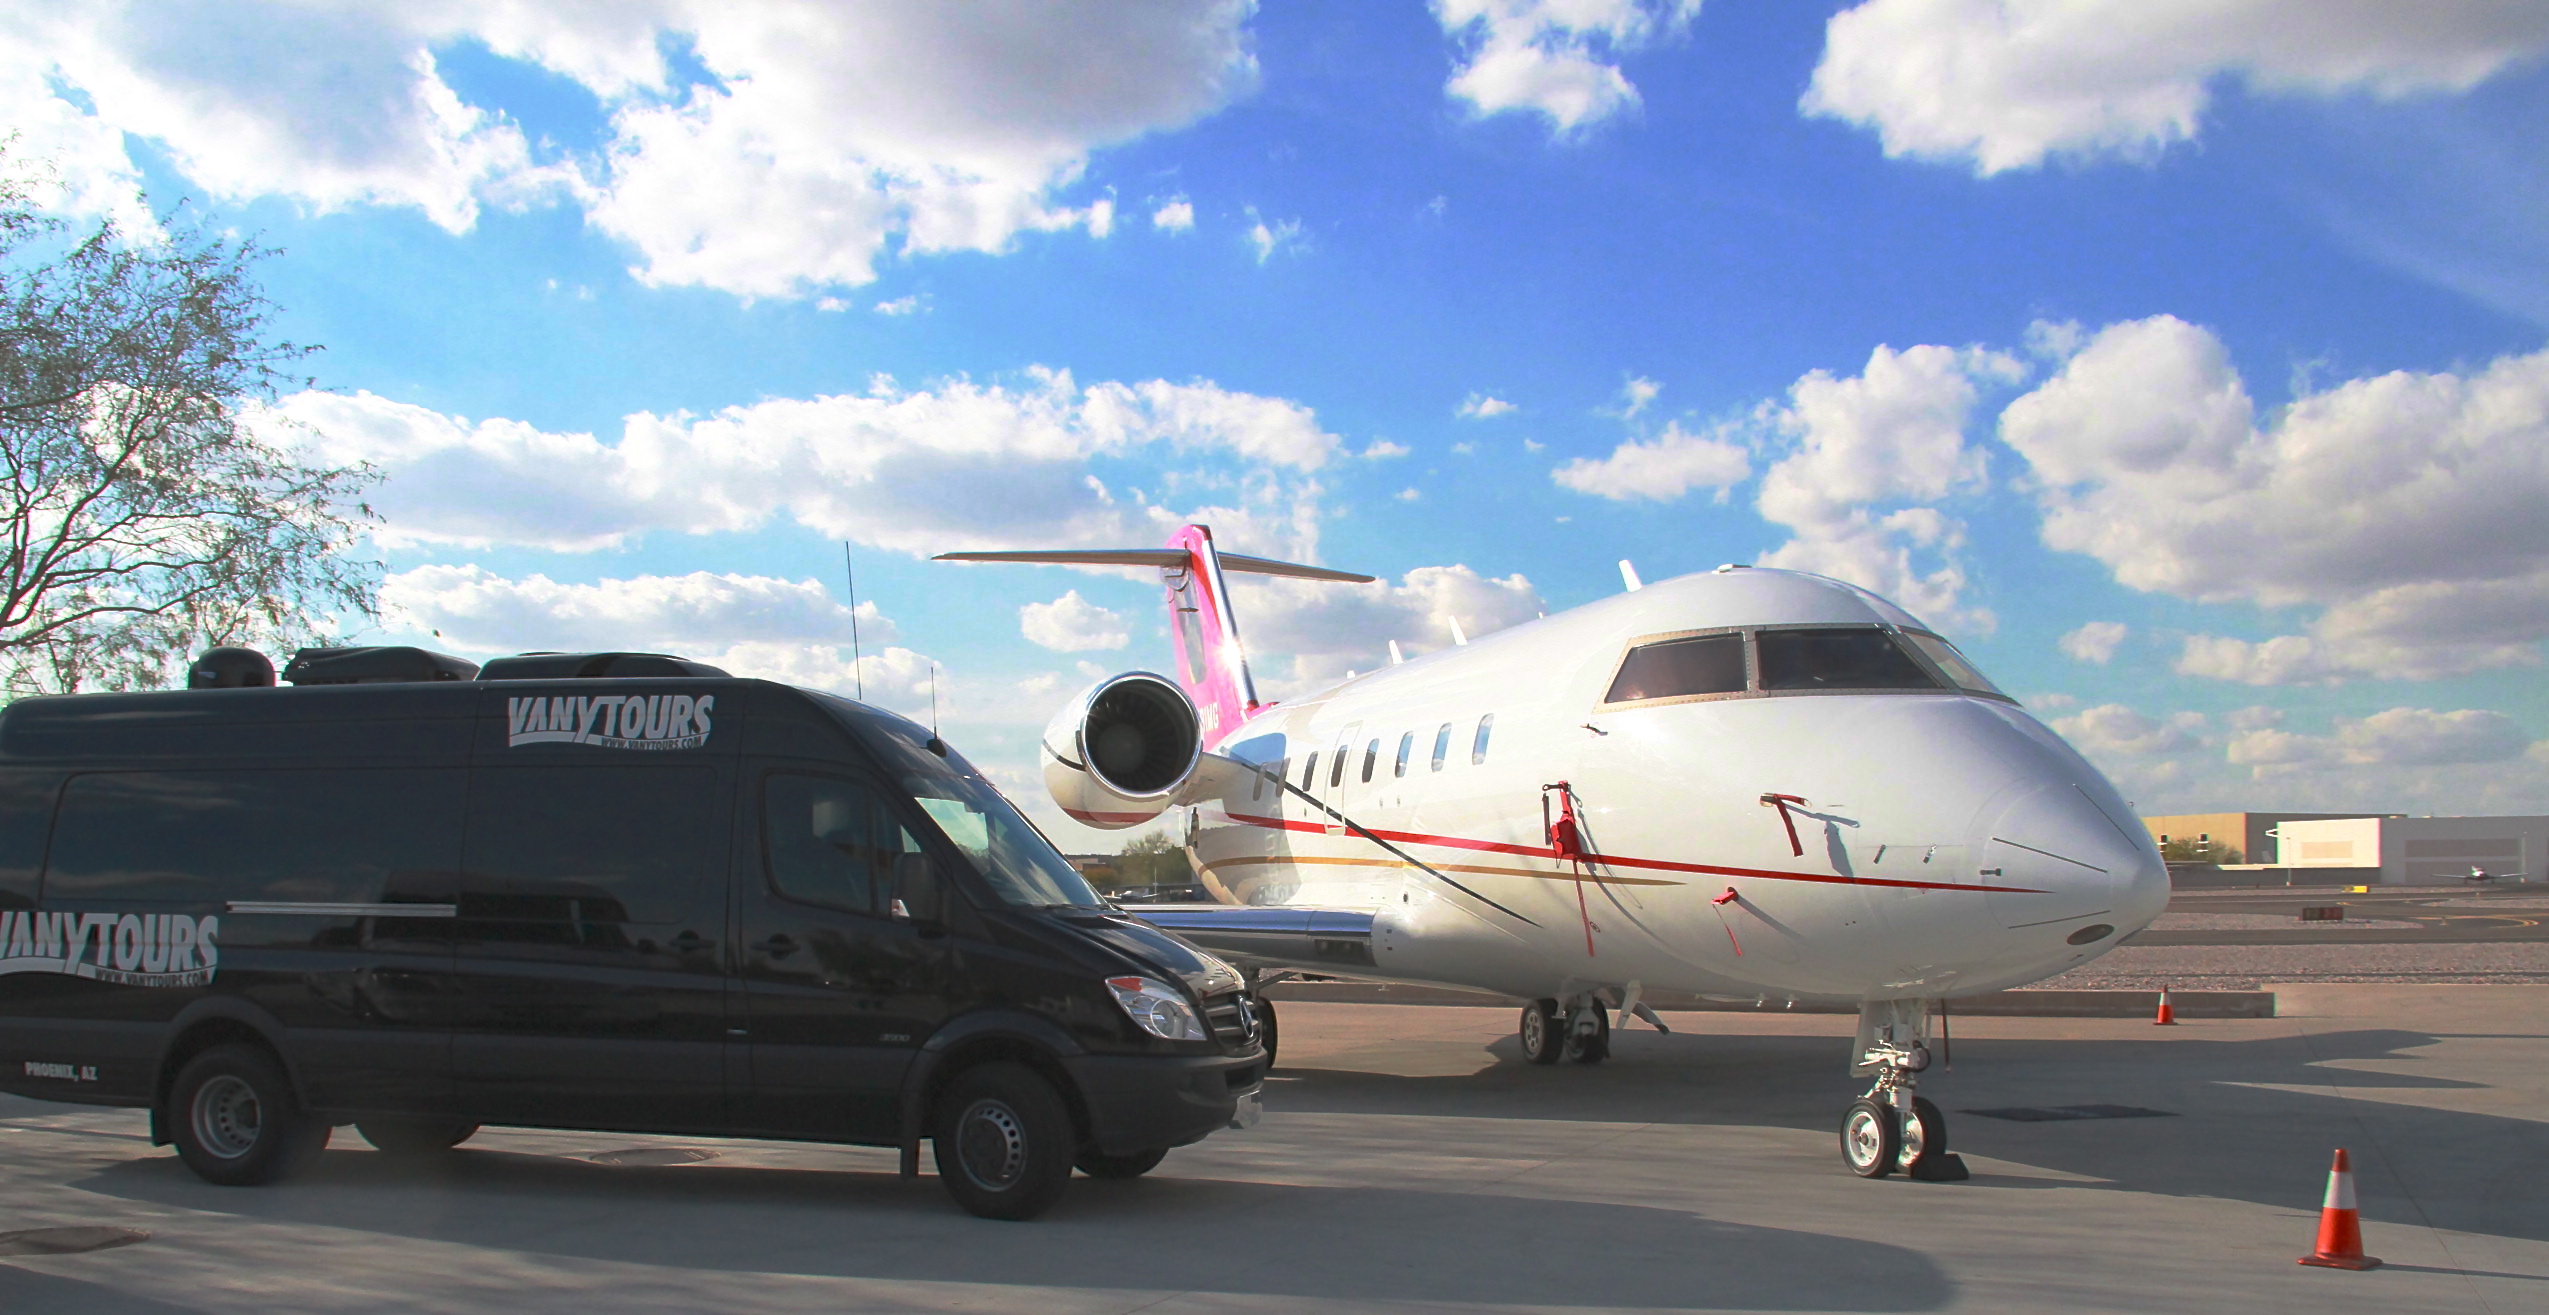 Van Y Tours-Phoenix airport pick up and delivery is complimentary.